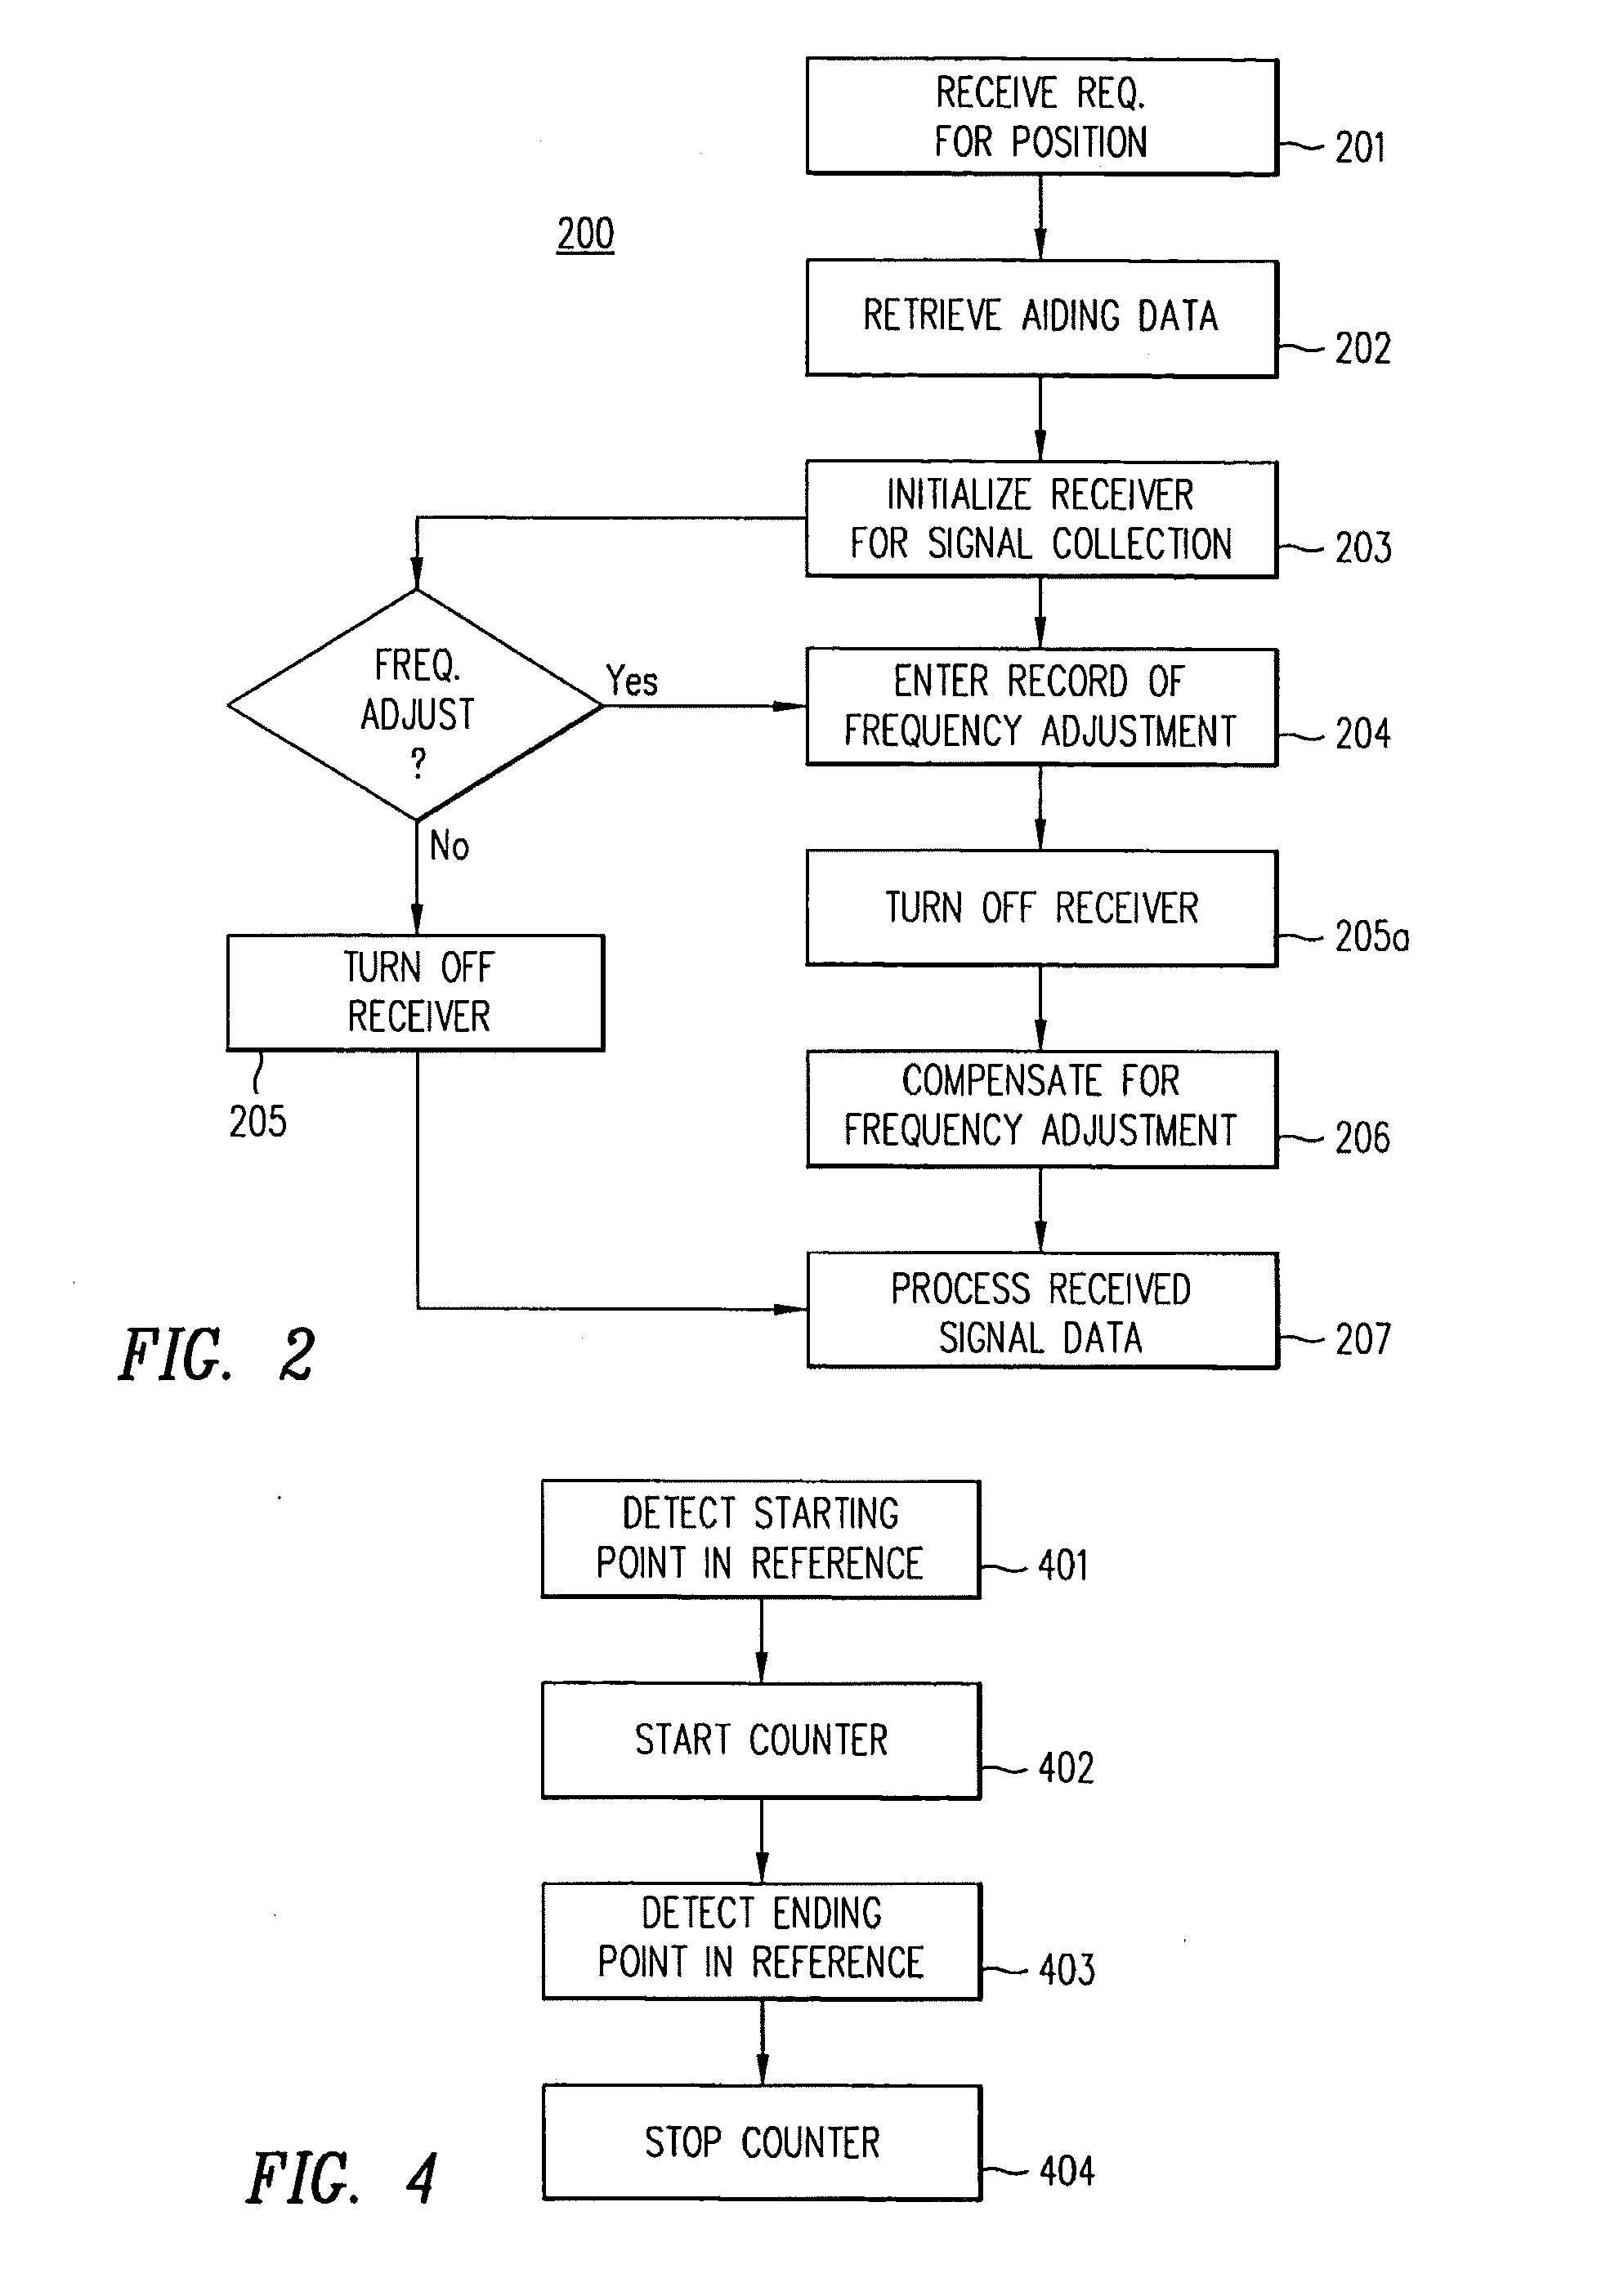 Compensation for Frequency Adjustment in Mobile Communication-Positioning Device With Shared Oscillator